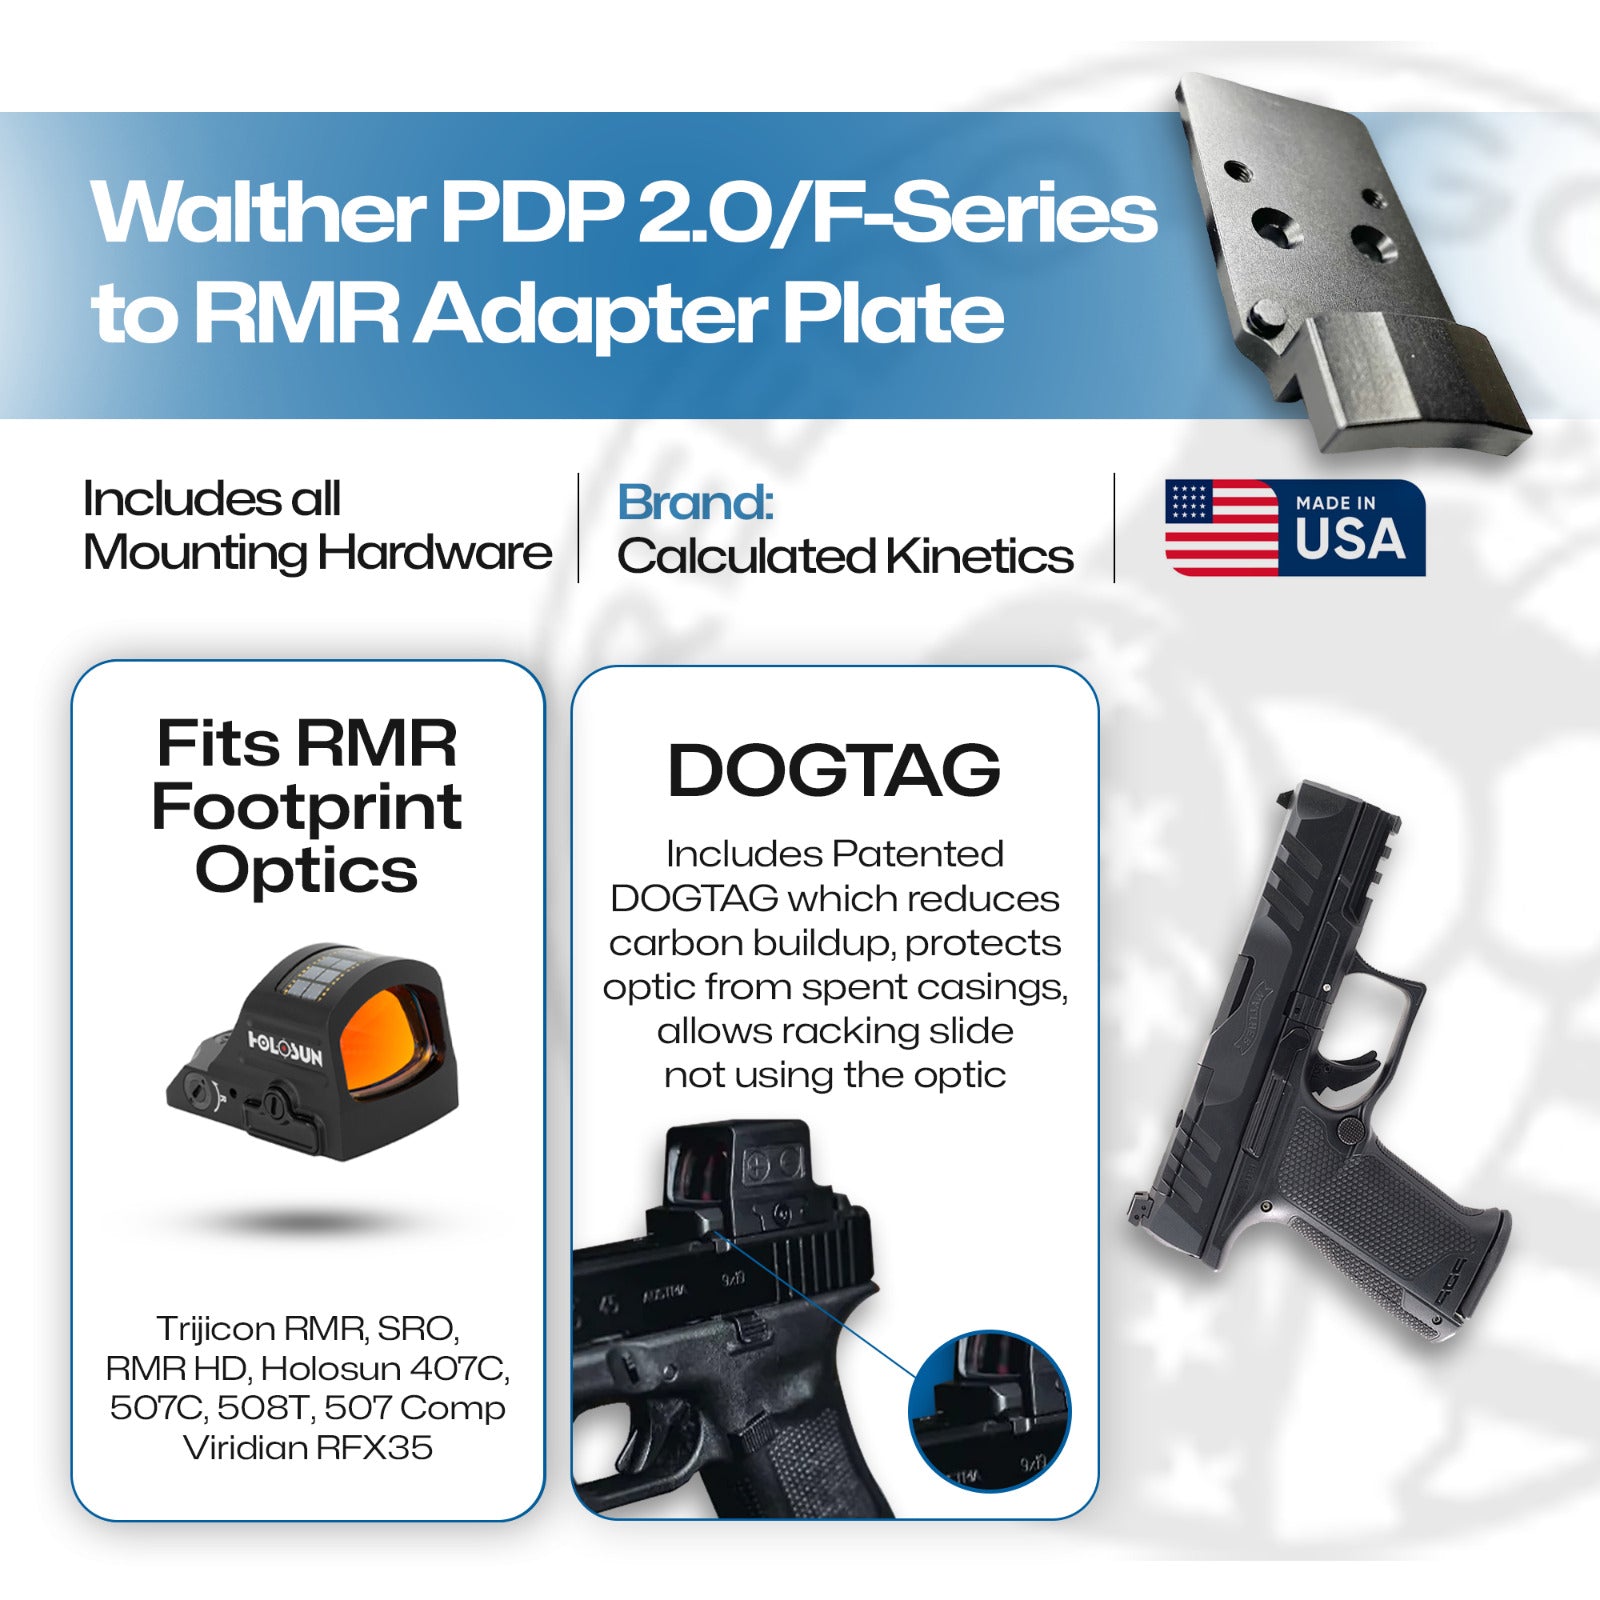 Walther PDP 2.0/F-Series RMR Adapter Plate - Aluminum - DOGTAG - Calculated Kinetics